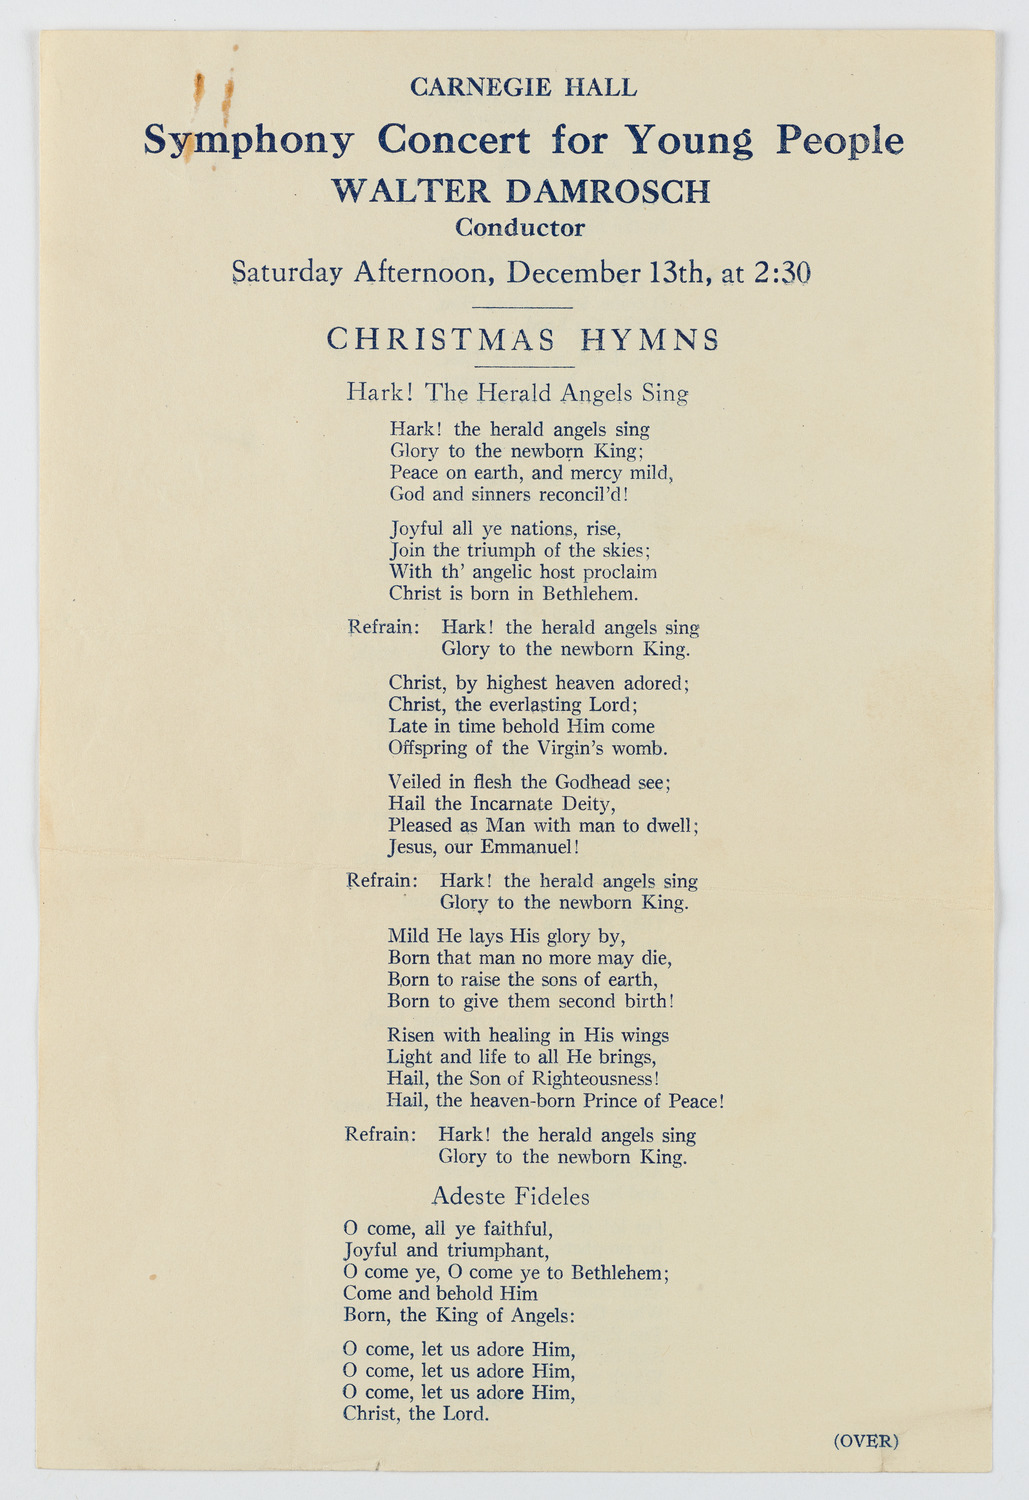 Symphony Concert for Young People, December 13, 1919